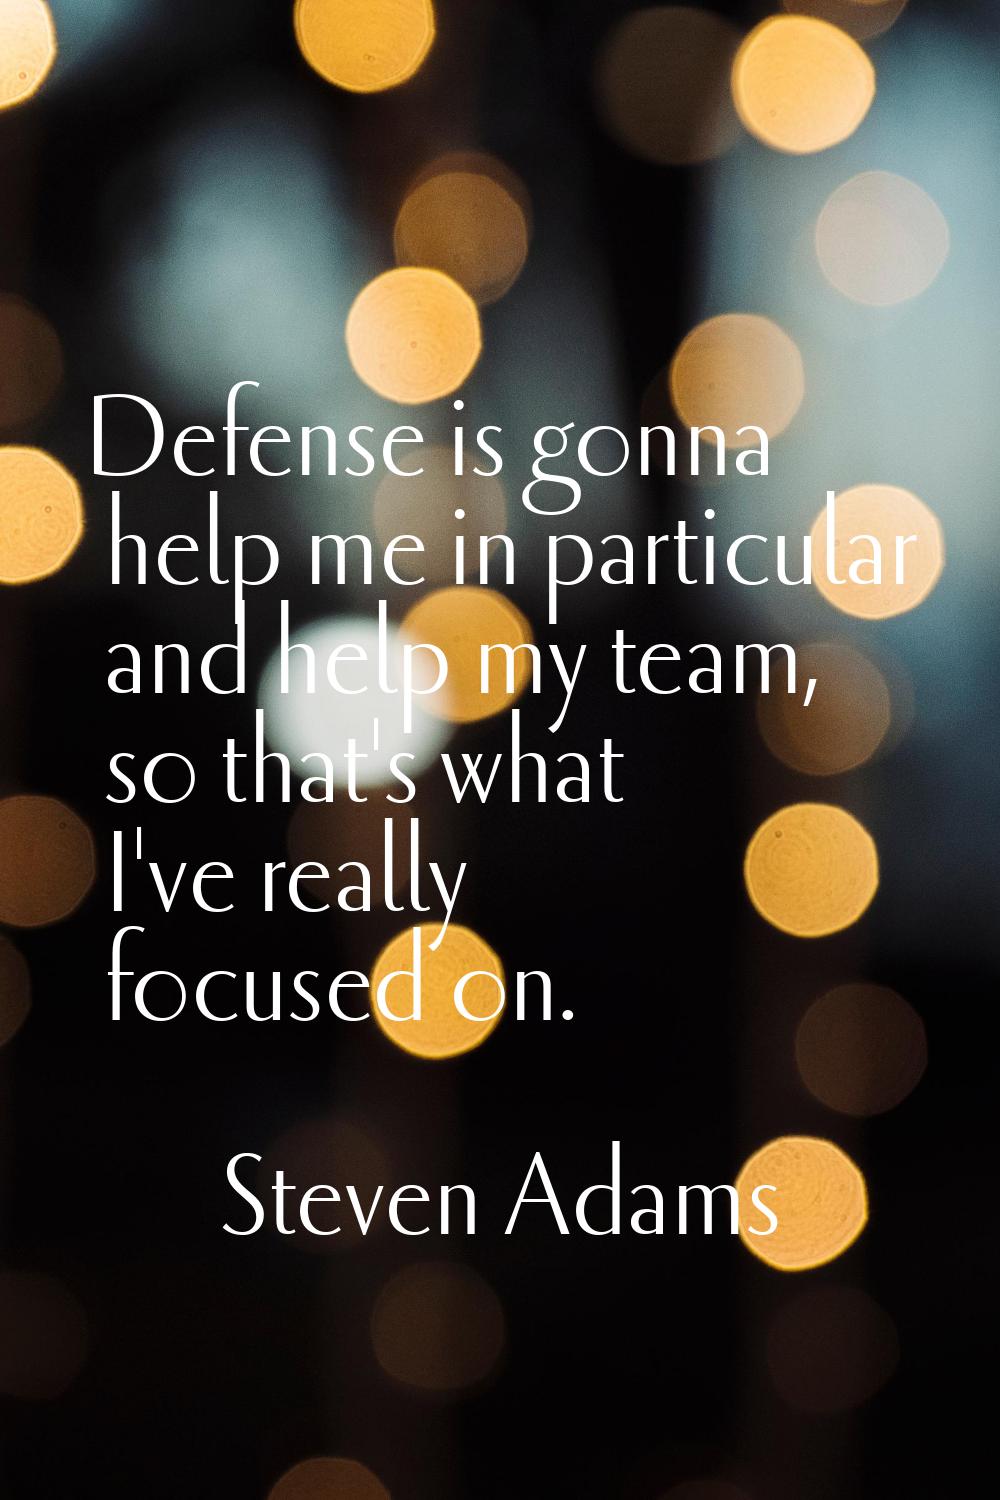 Defense is gonna help me in particular and help my team, so that's what I've really focused on.